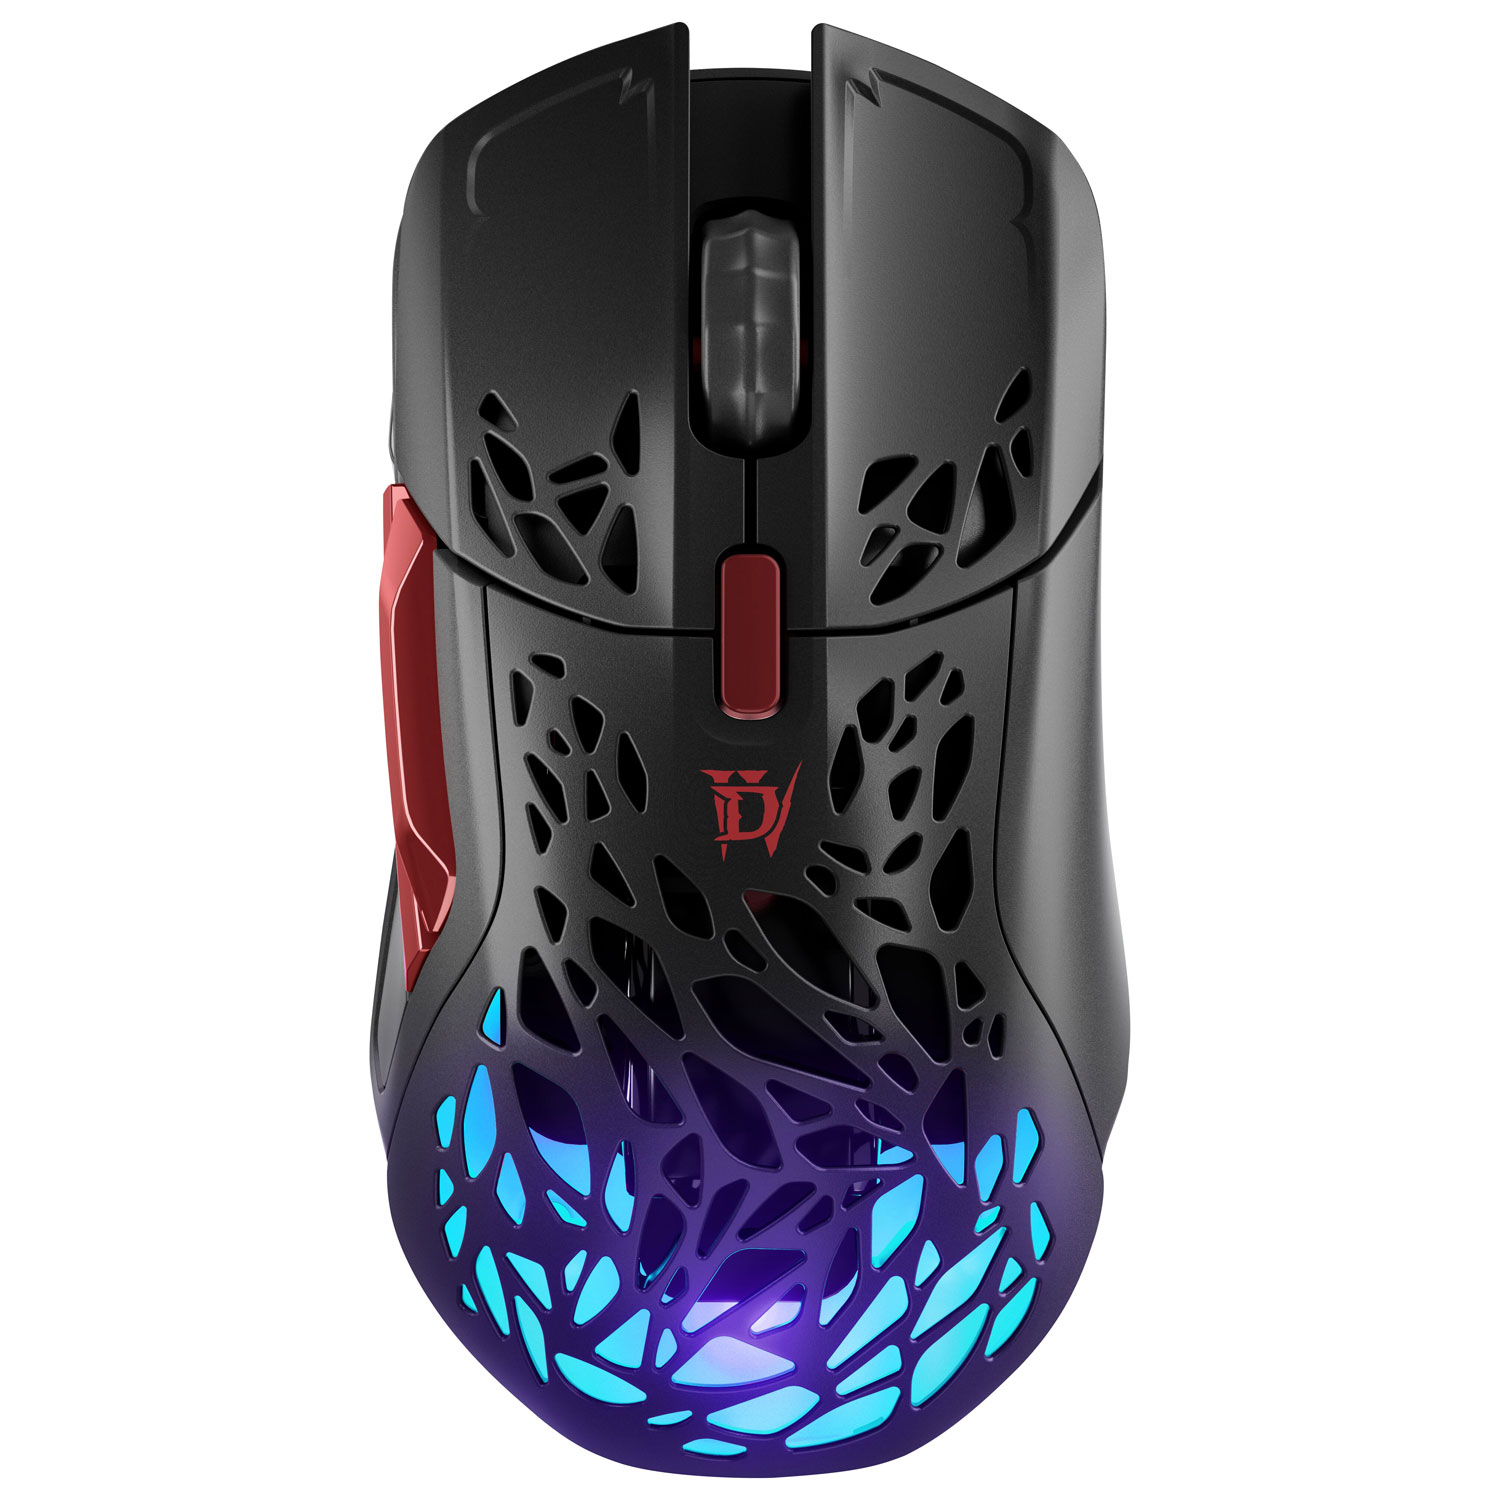 Aerox 3 Ghost on sale for $50 bucks at bestbuy has to be one of the best  deals in wireless mice rn. : r/MouseReview